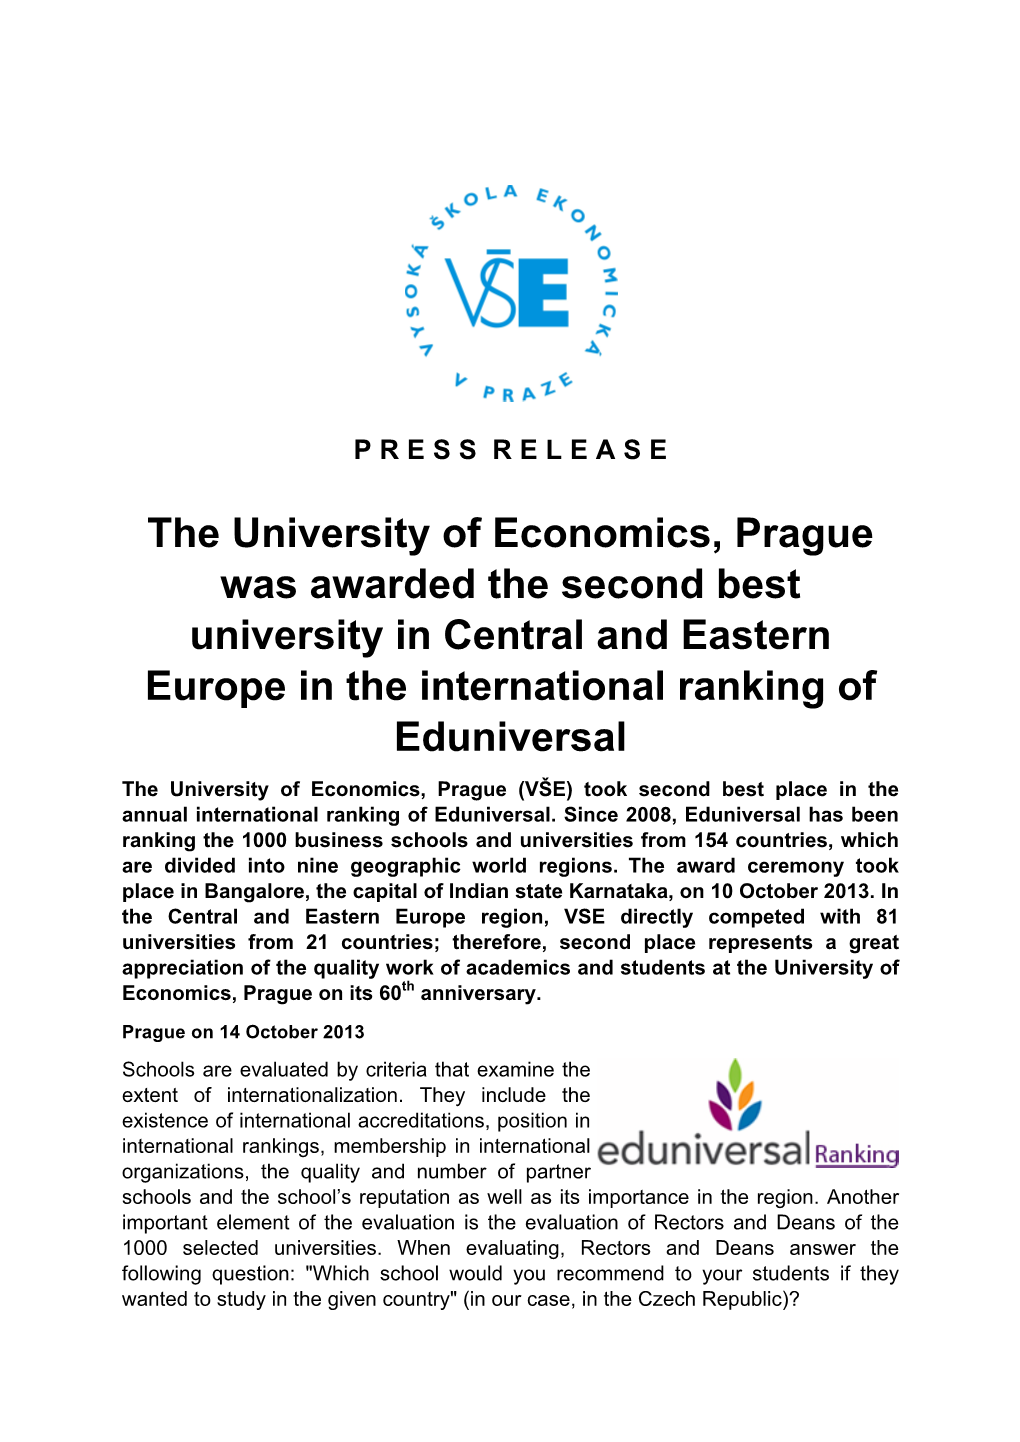 The University of Economics, Prague Was Awarded the Second Best